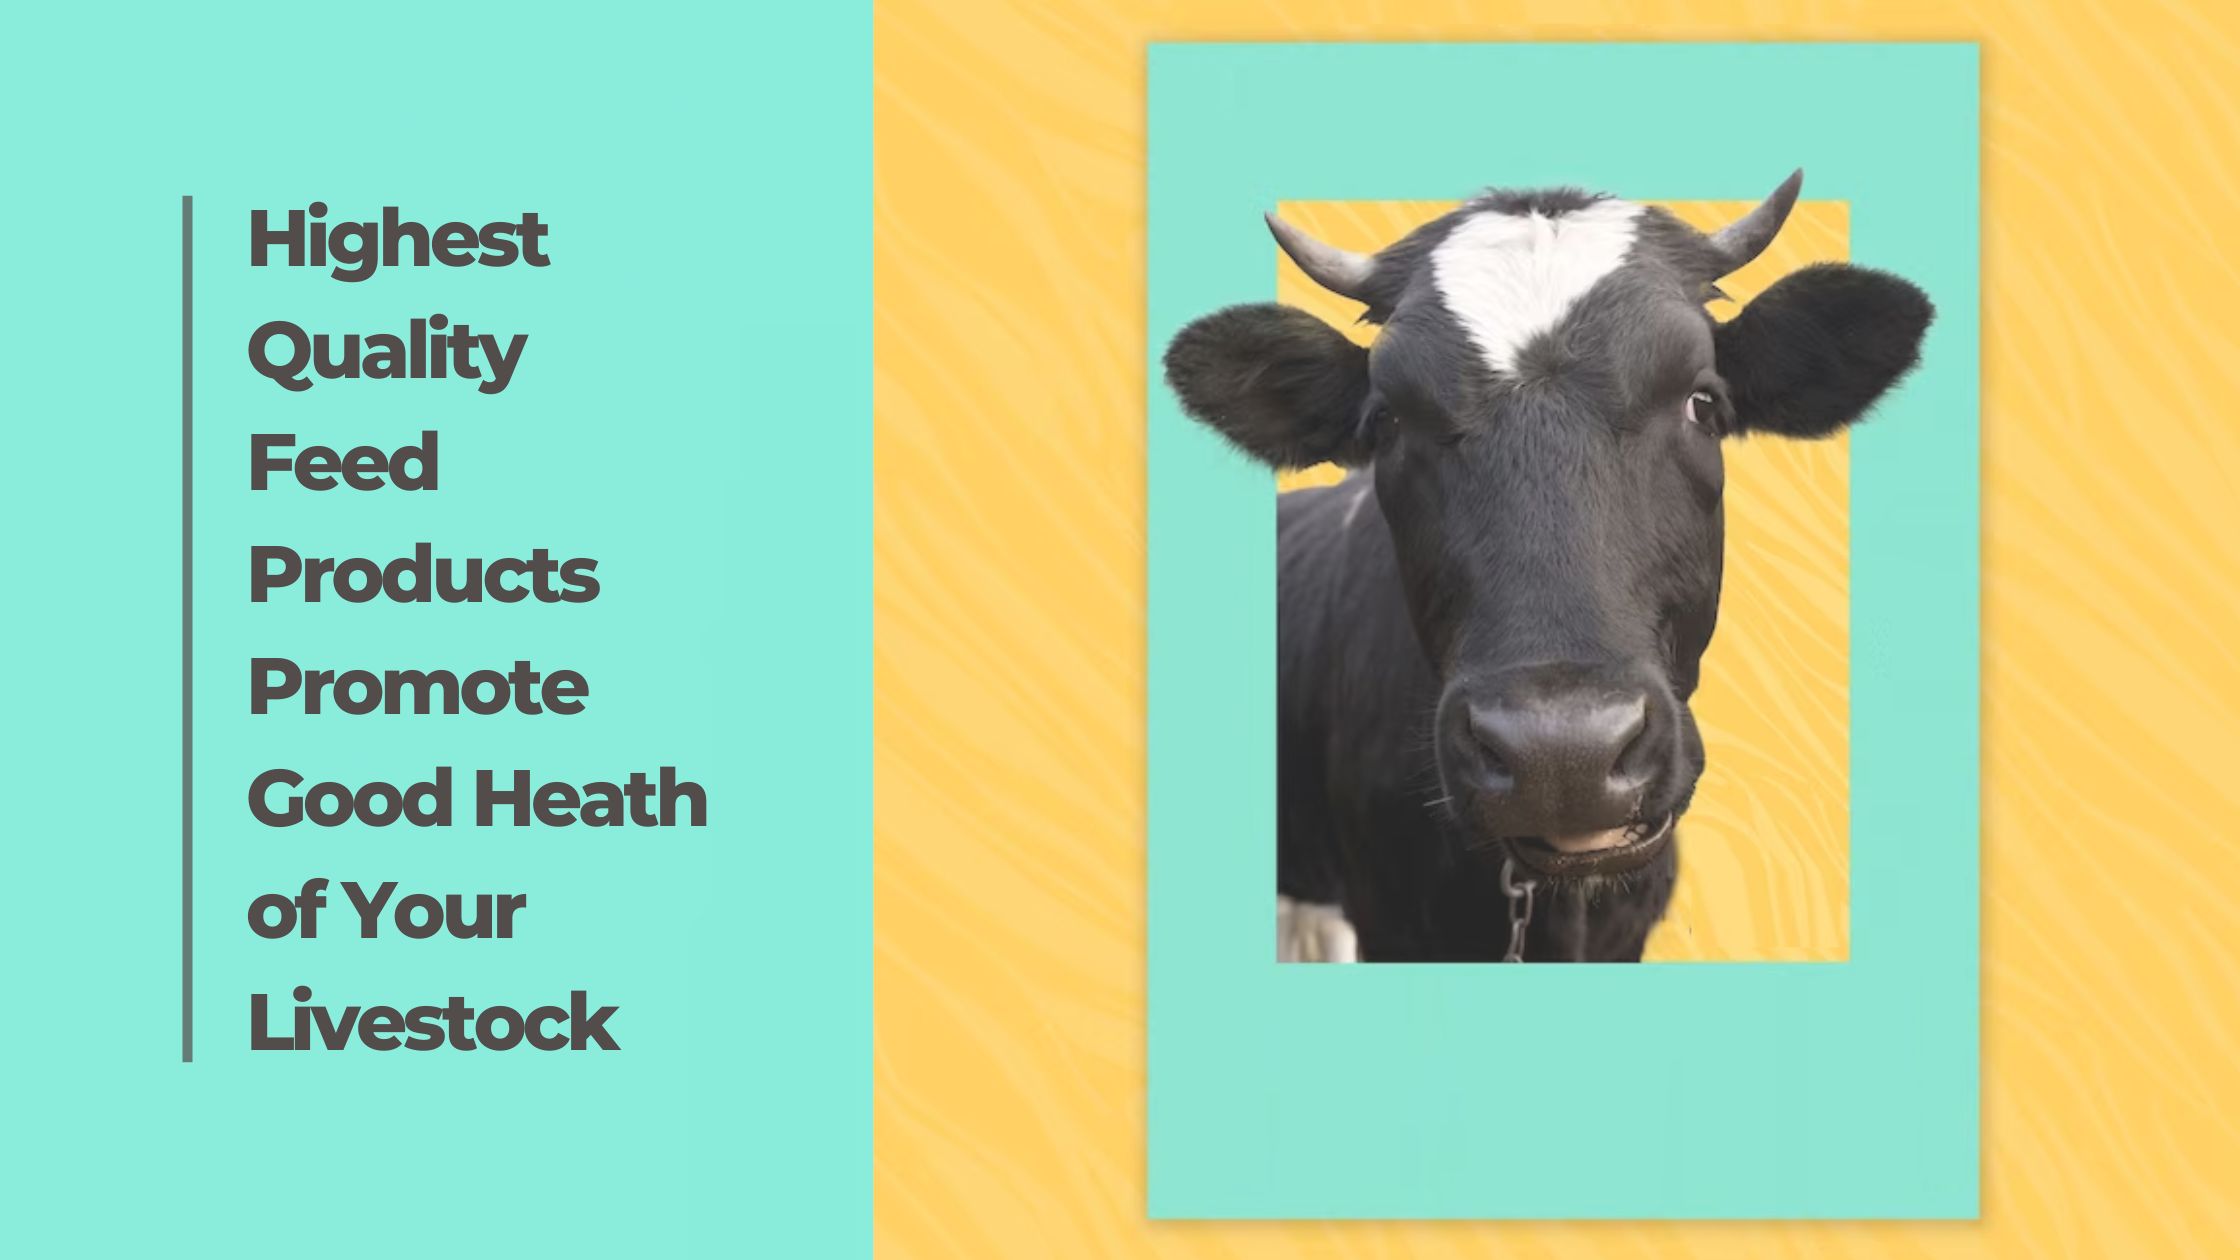 Highest Quality Feed Products Promote Good Heath of Your Livestock